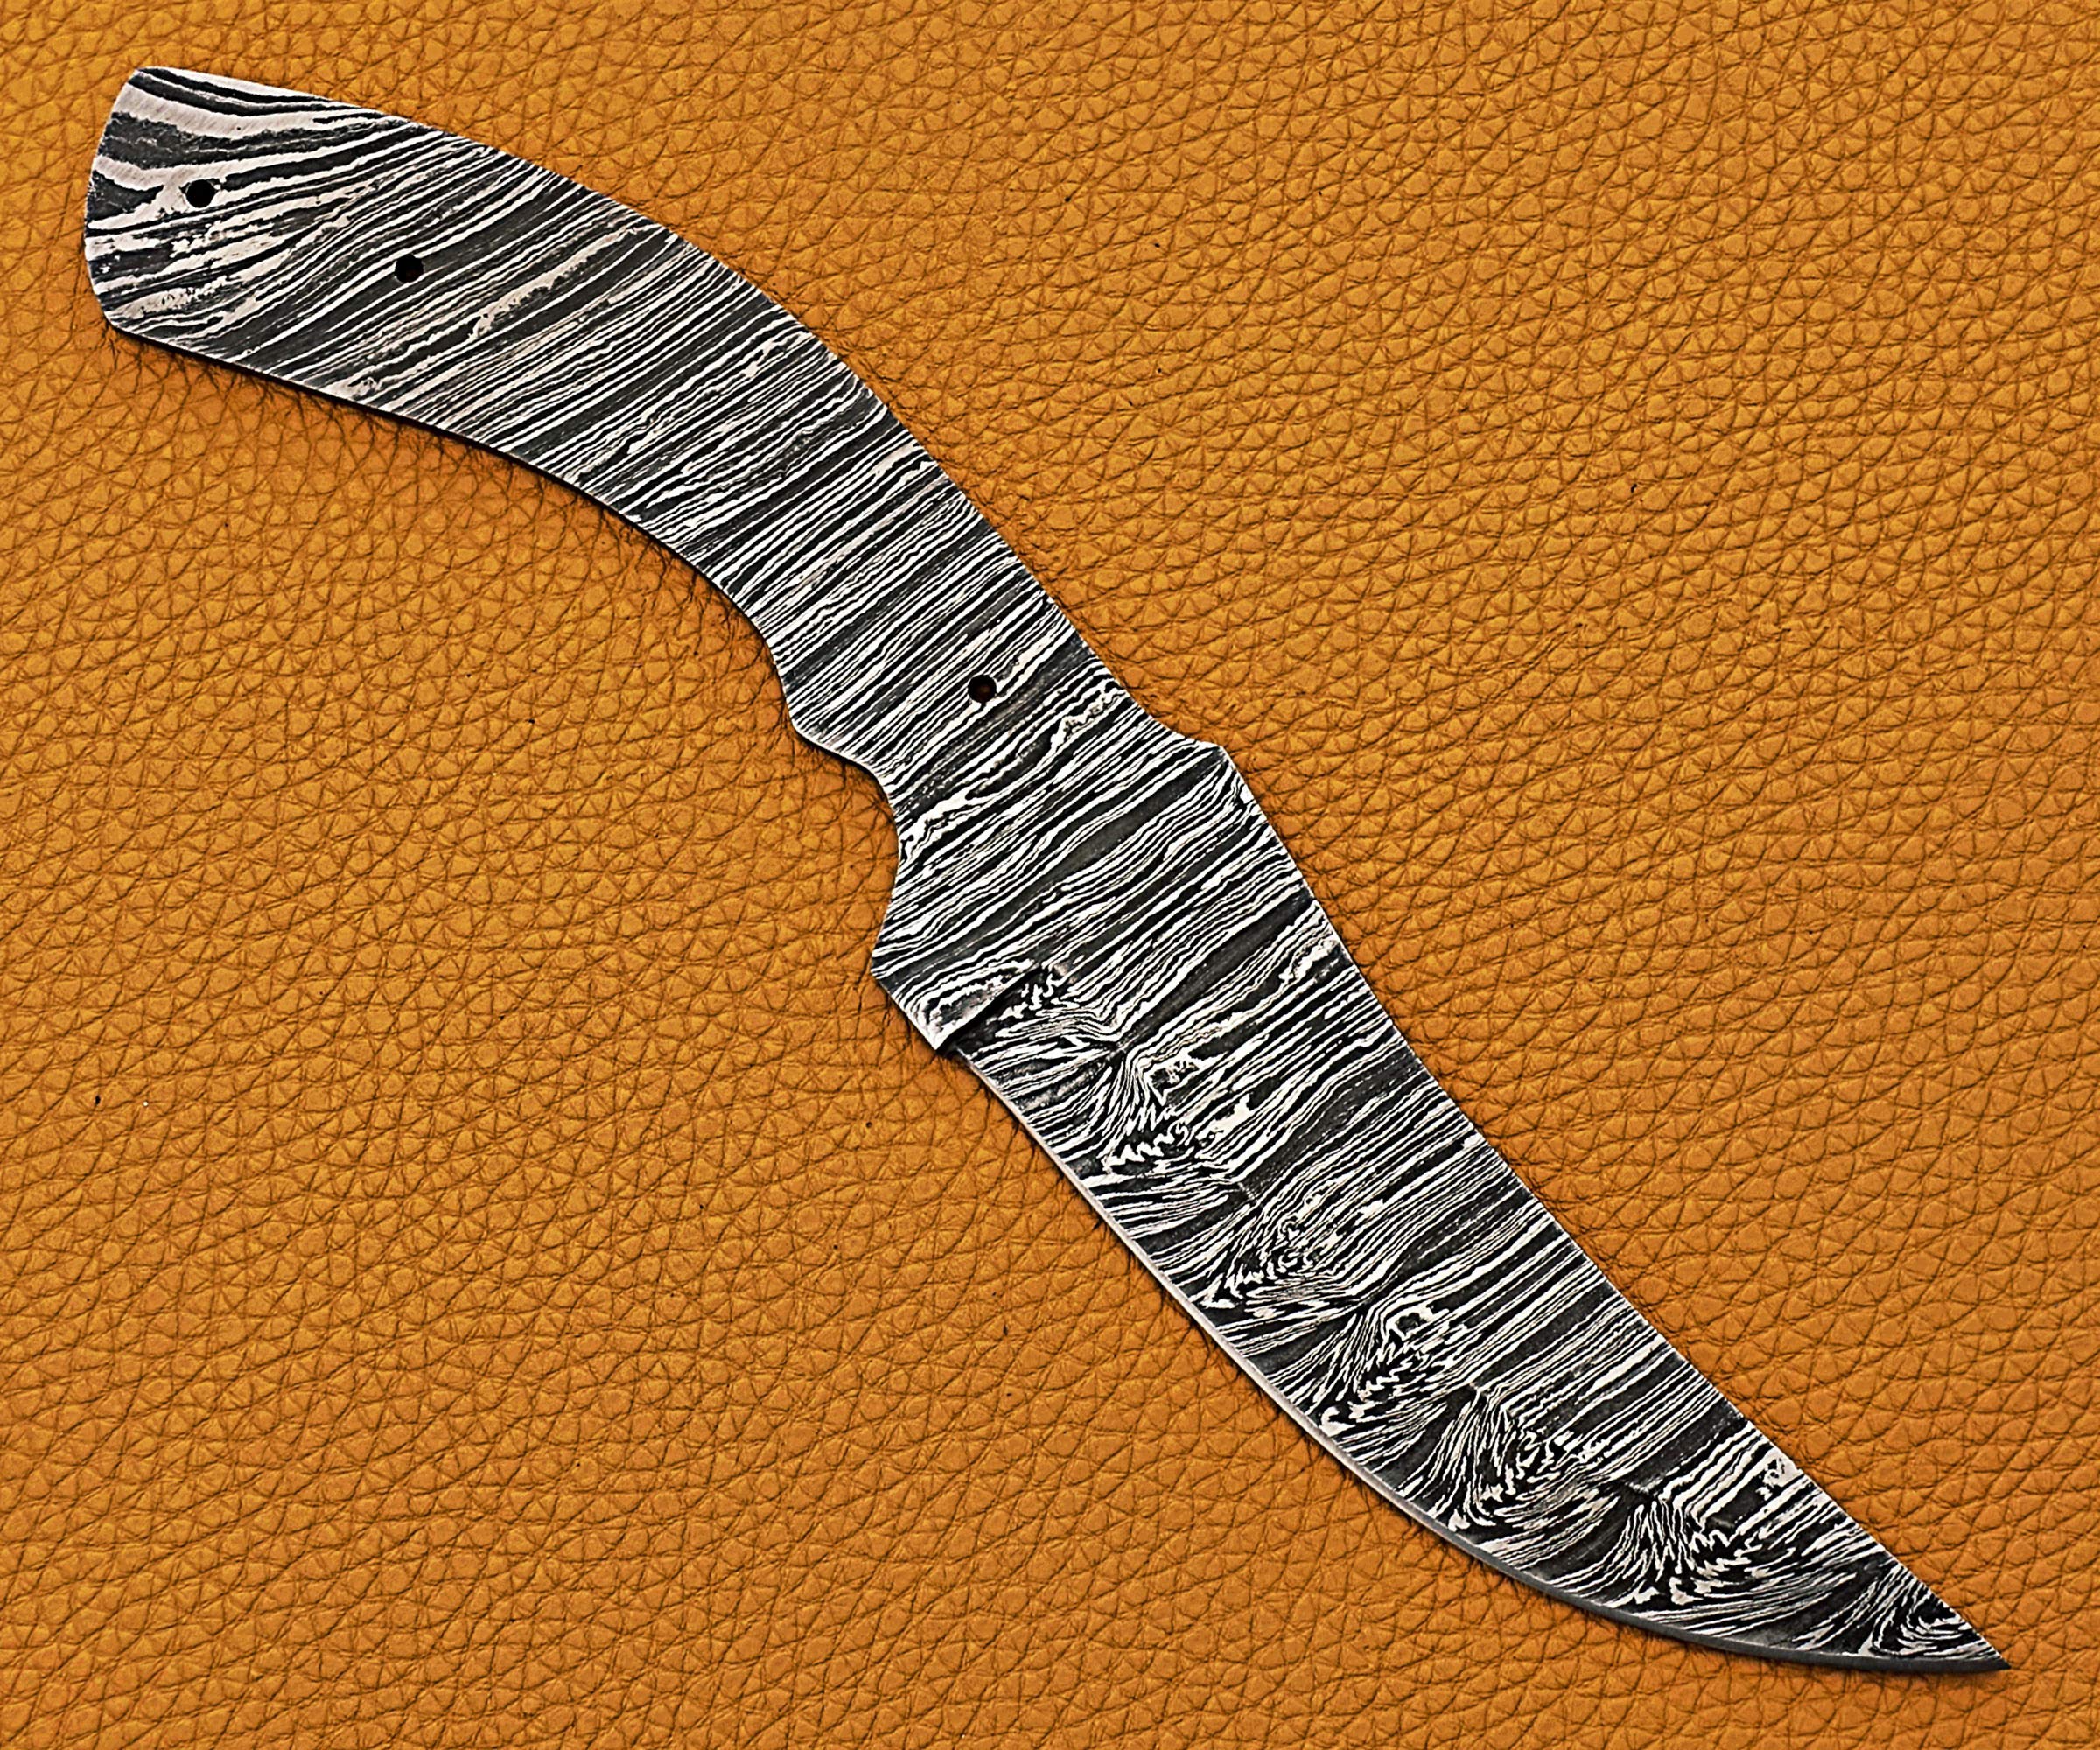 9.25 inches long trailing point blank blade skinning knife, hand forged Ladder Pattern Damascus steel blade, 4.5" scale with 3 Pin hole, 4.25" trailing point blade with 4" cutting edge